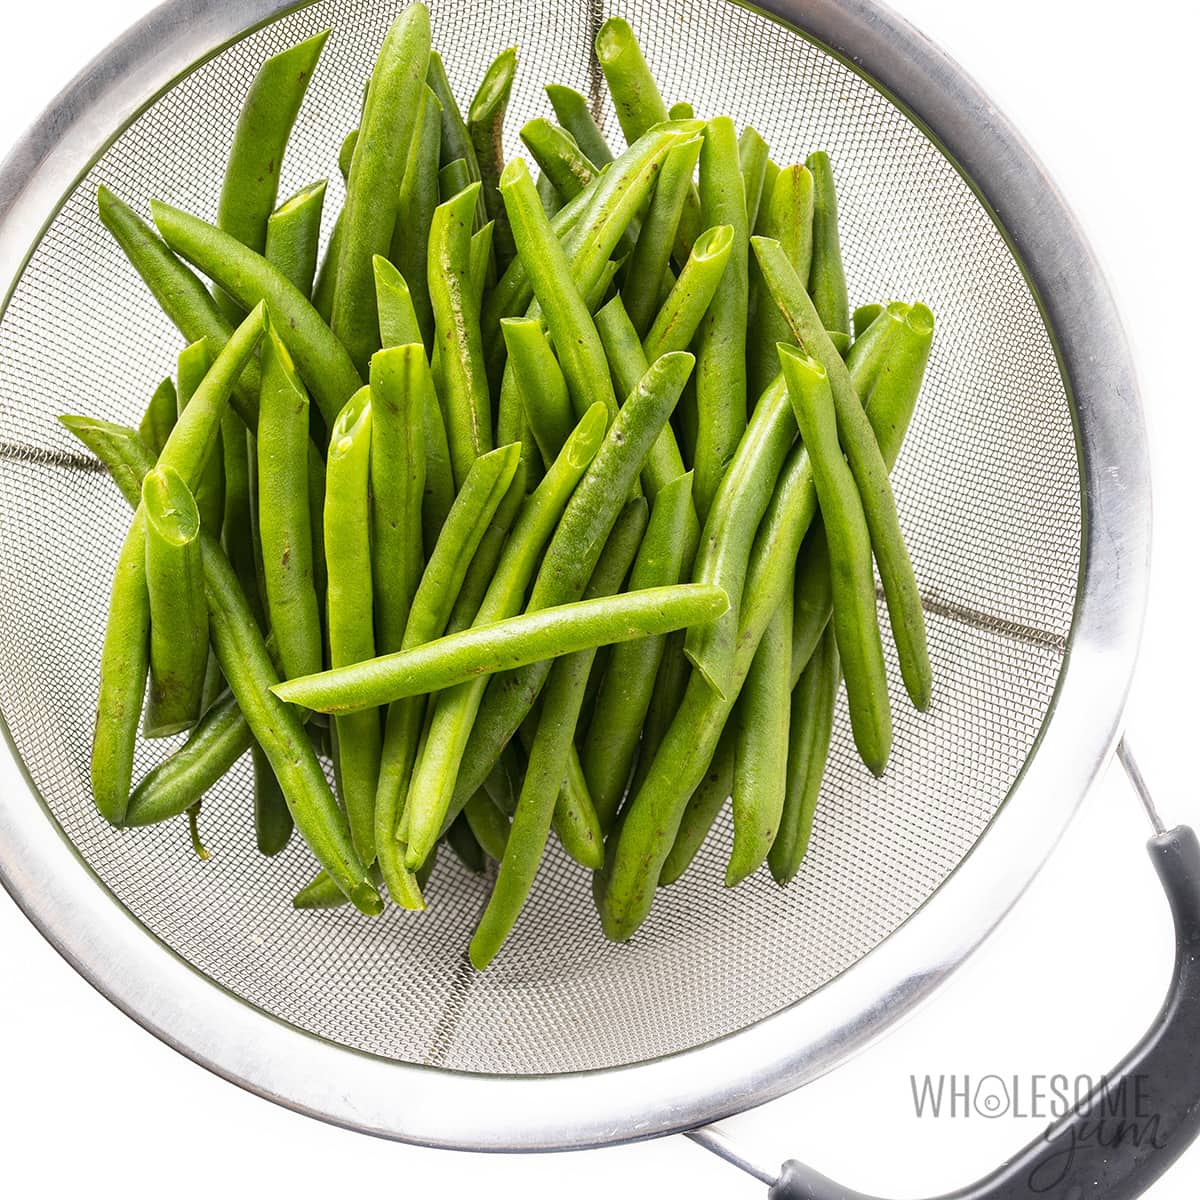 Trimmed green beans in a colander.